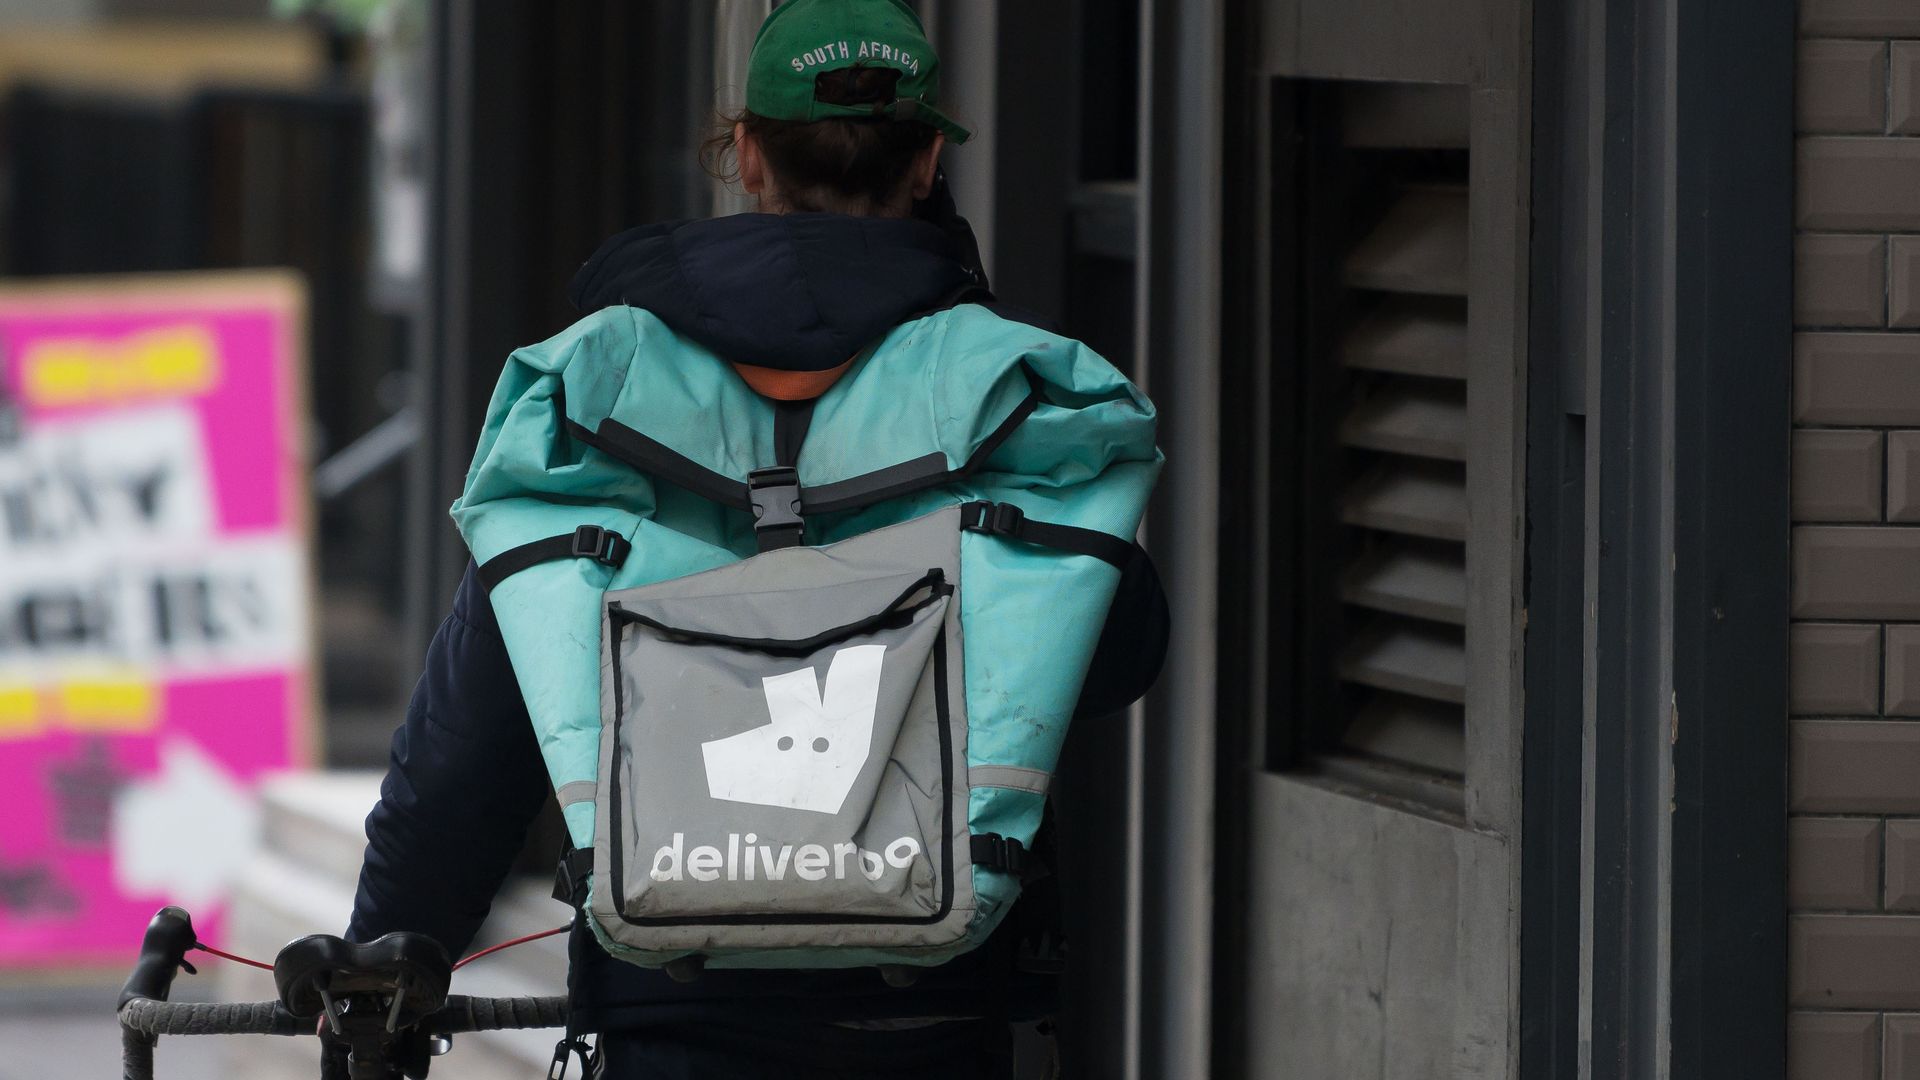 In this image, a Deliveroo deliveryperson walks down the street with a package on their back and guiding a bicycle.